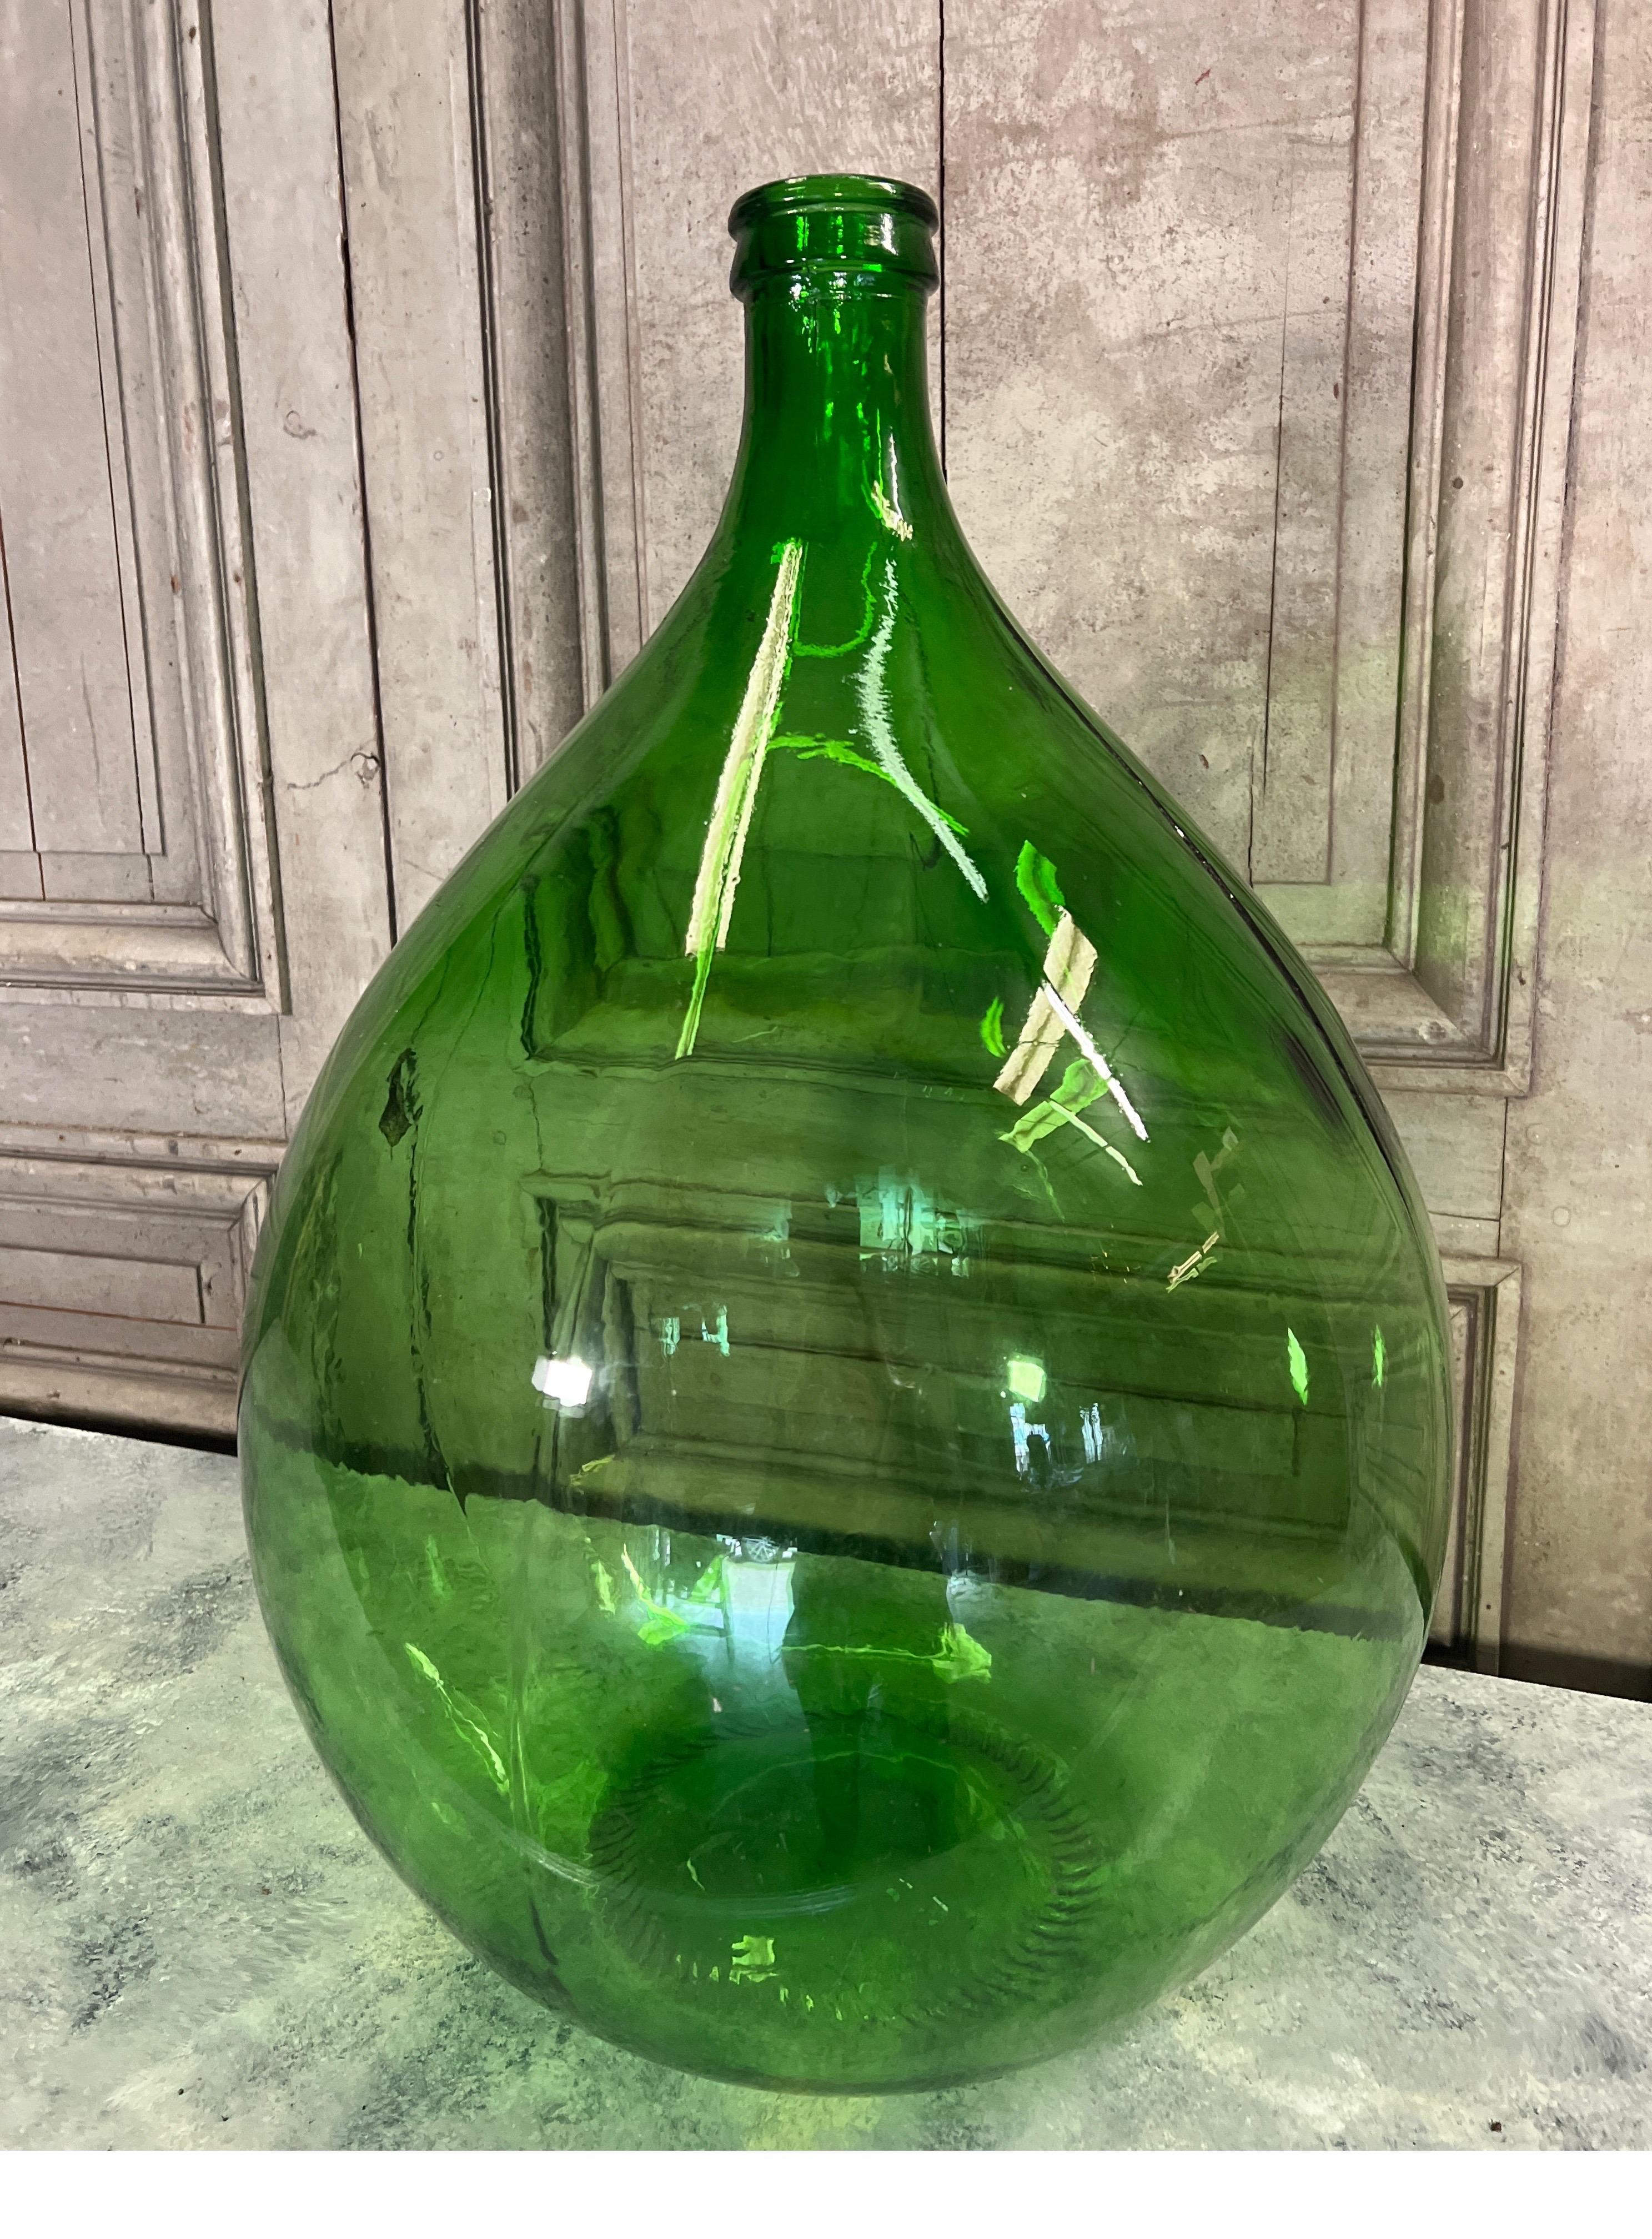 Our latest collection of large vintage French Dame Jeanne glass wine bottles have made their way from Provence and are now available! The oversized nature were once used for fermentation of wine and then covered in straw and wicker to protect the